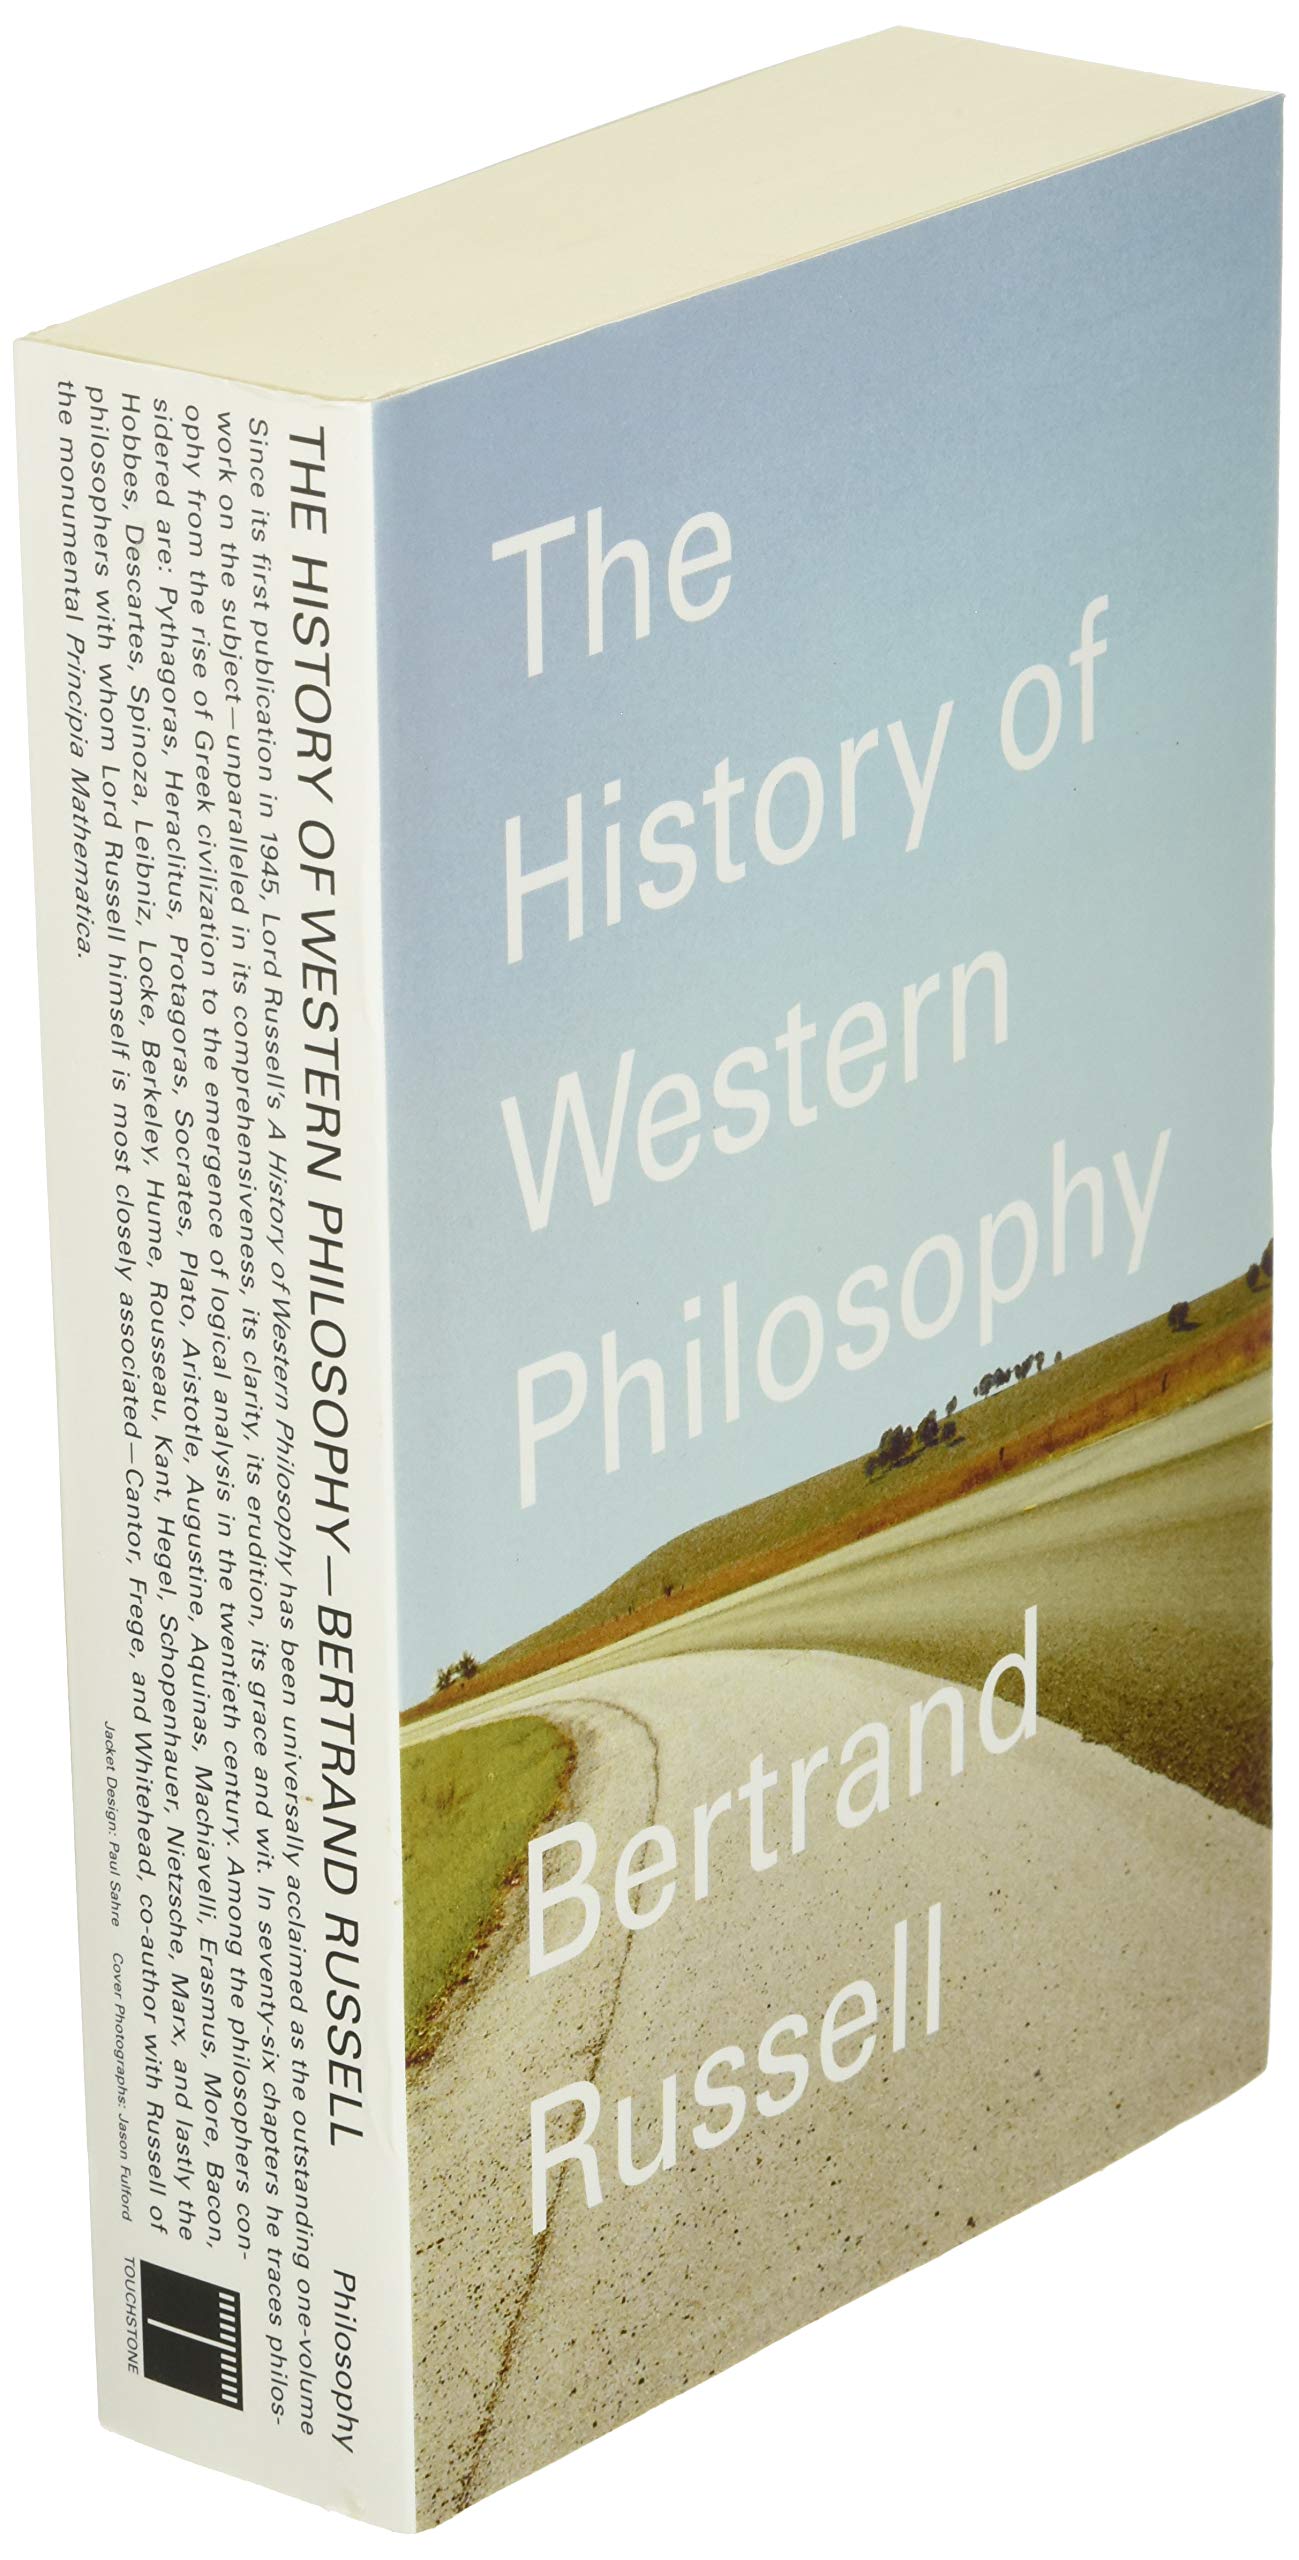 The History of Western Philosophy by Bertrand Russell